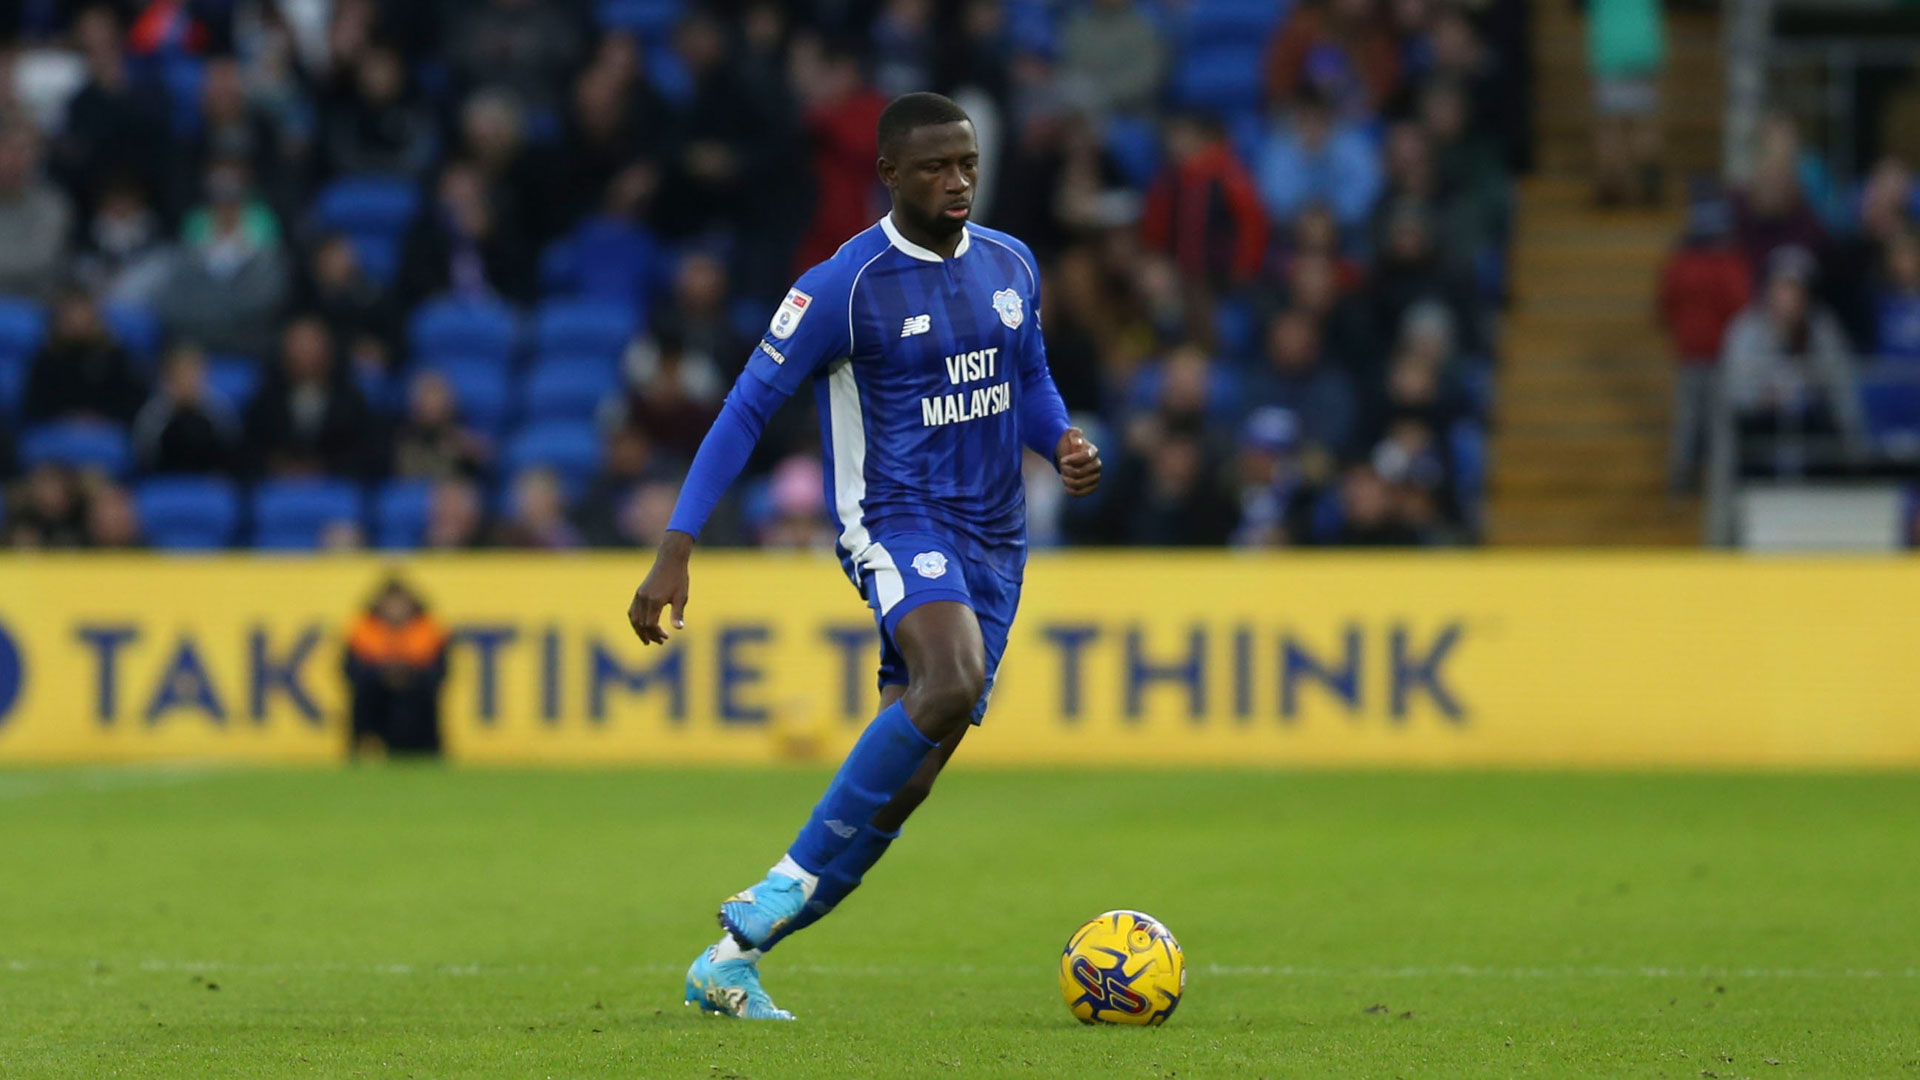 Jamilu Collins in action for Cardiff City